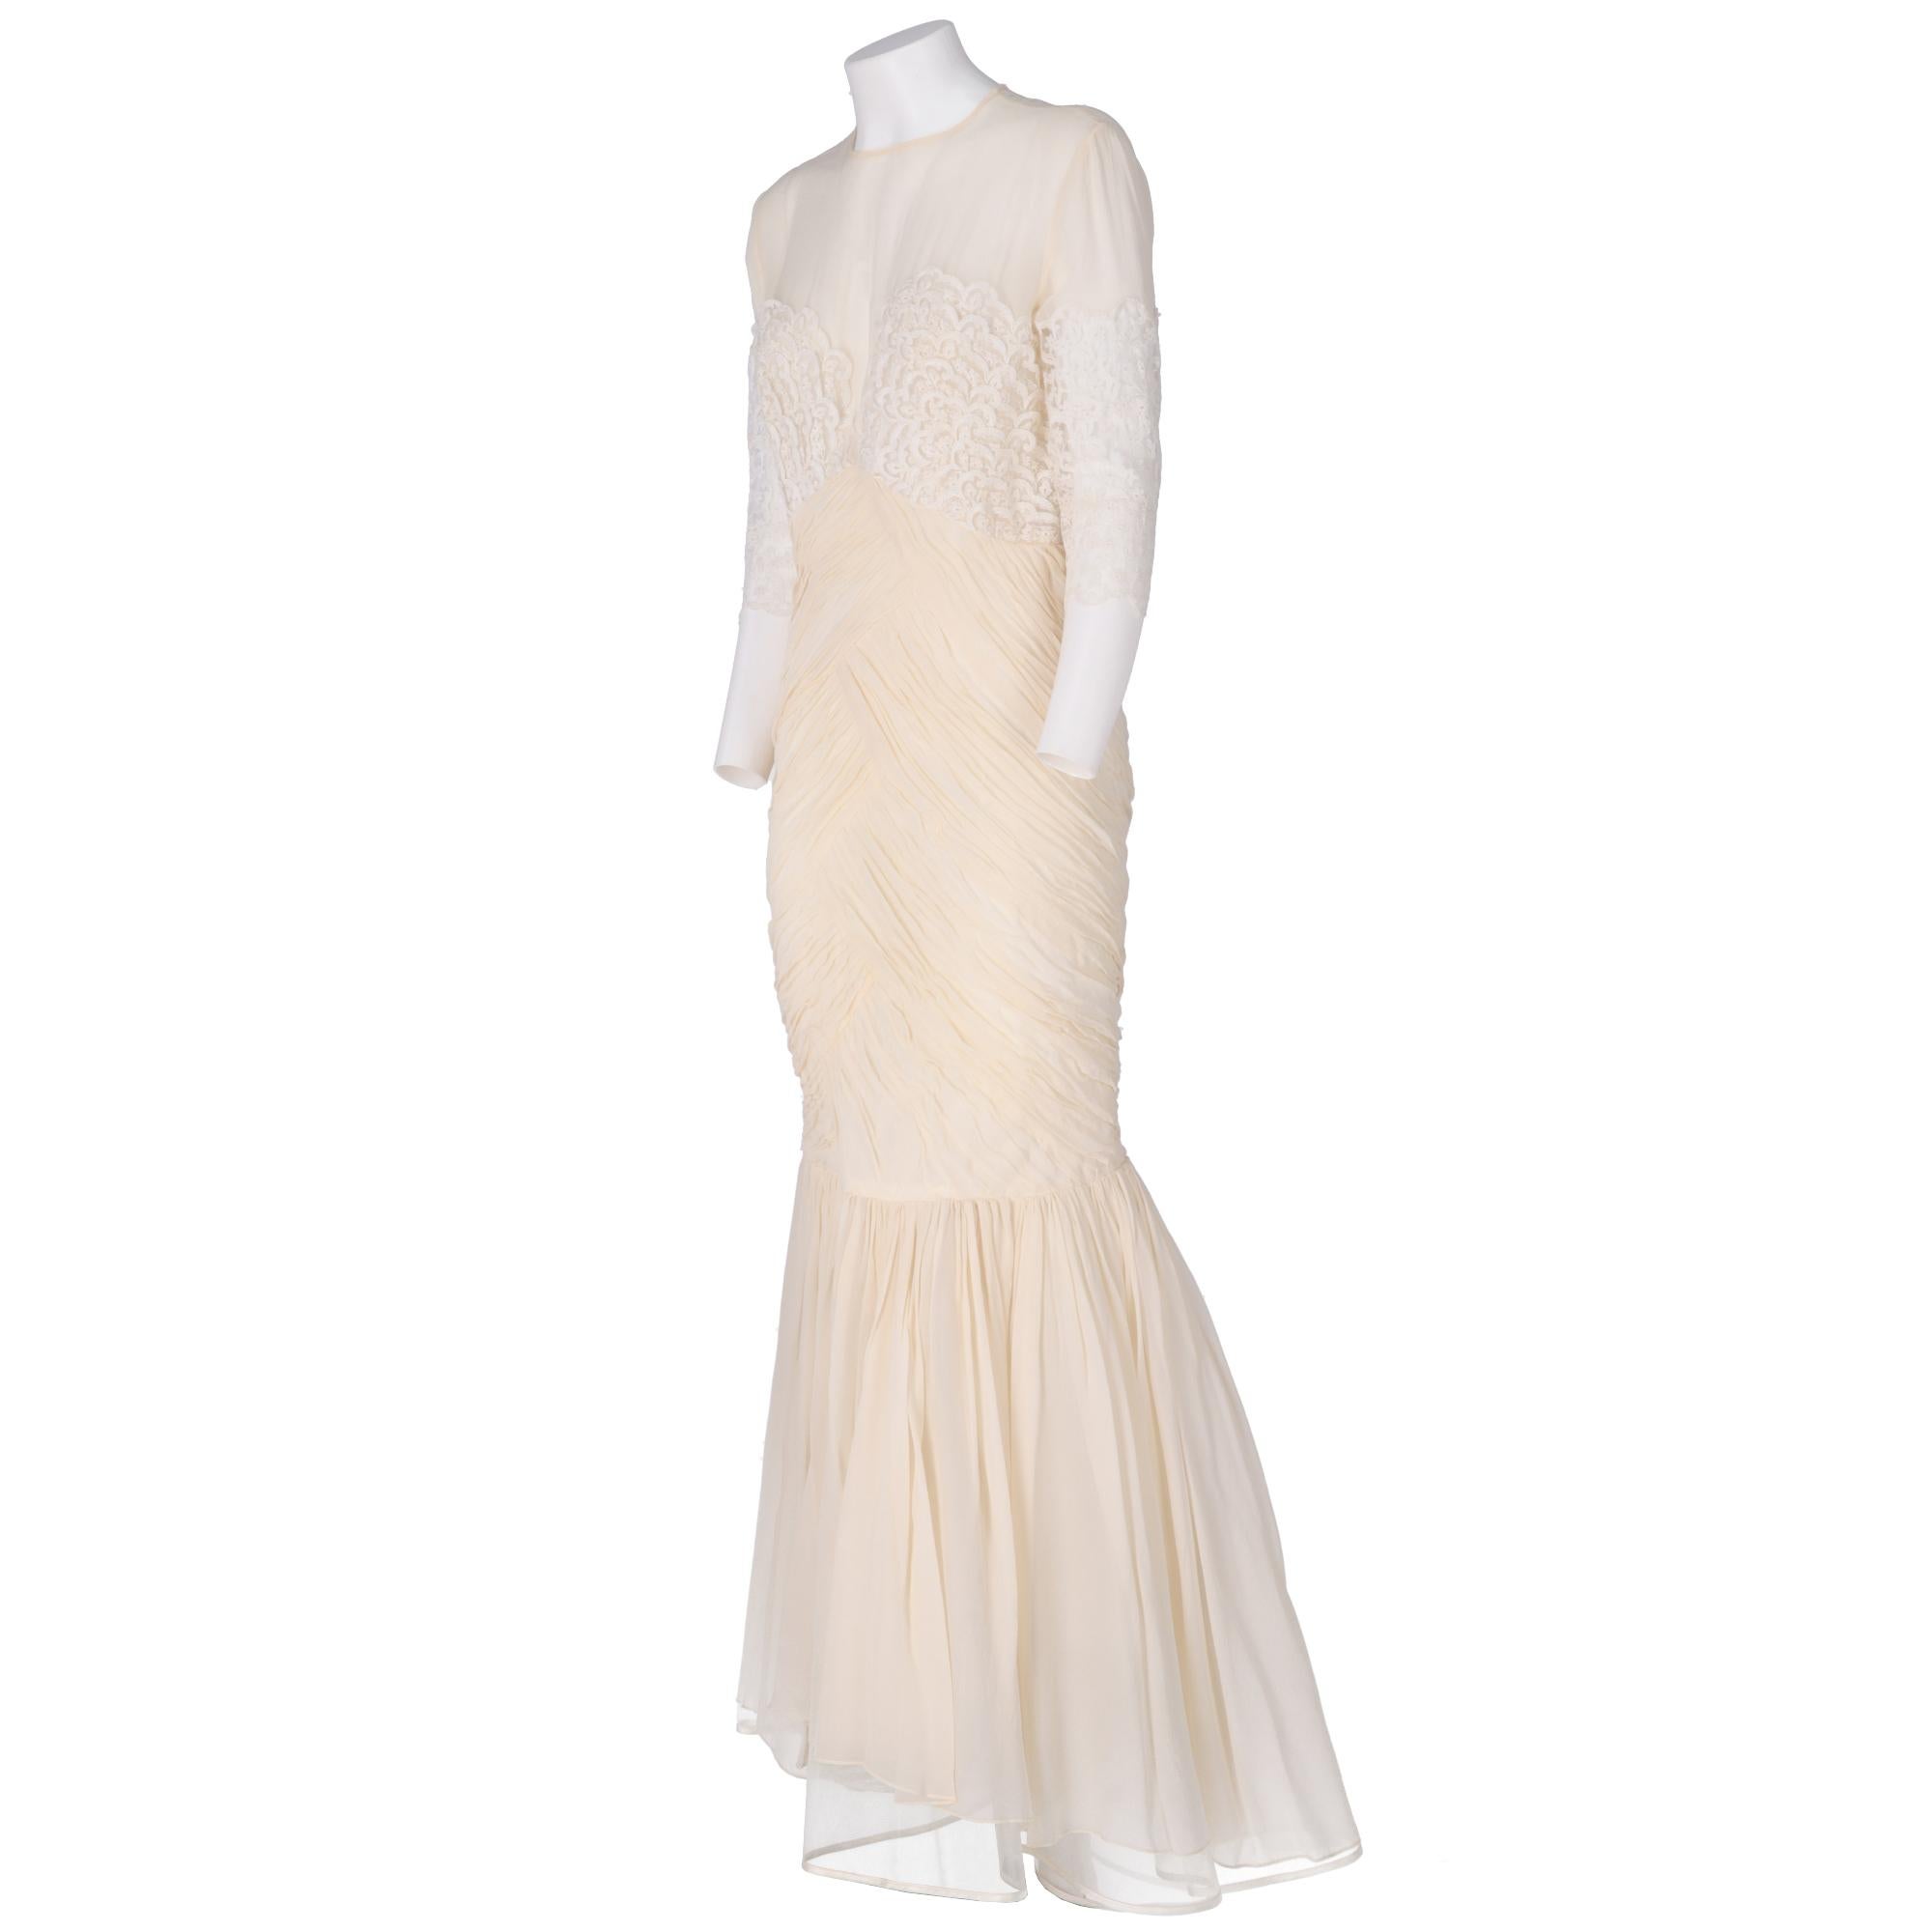 Ivory tailored wedding dress, with long gathered mermaid skirt with rigid tulle inside, crew neck, semi-transparent top with decorative white lace insert with short sleeves, zip and button closure on the back.

The dress has a tear between the